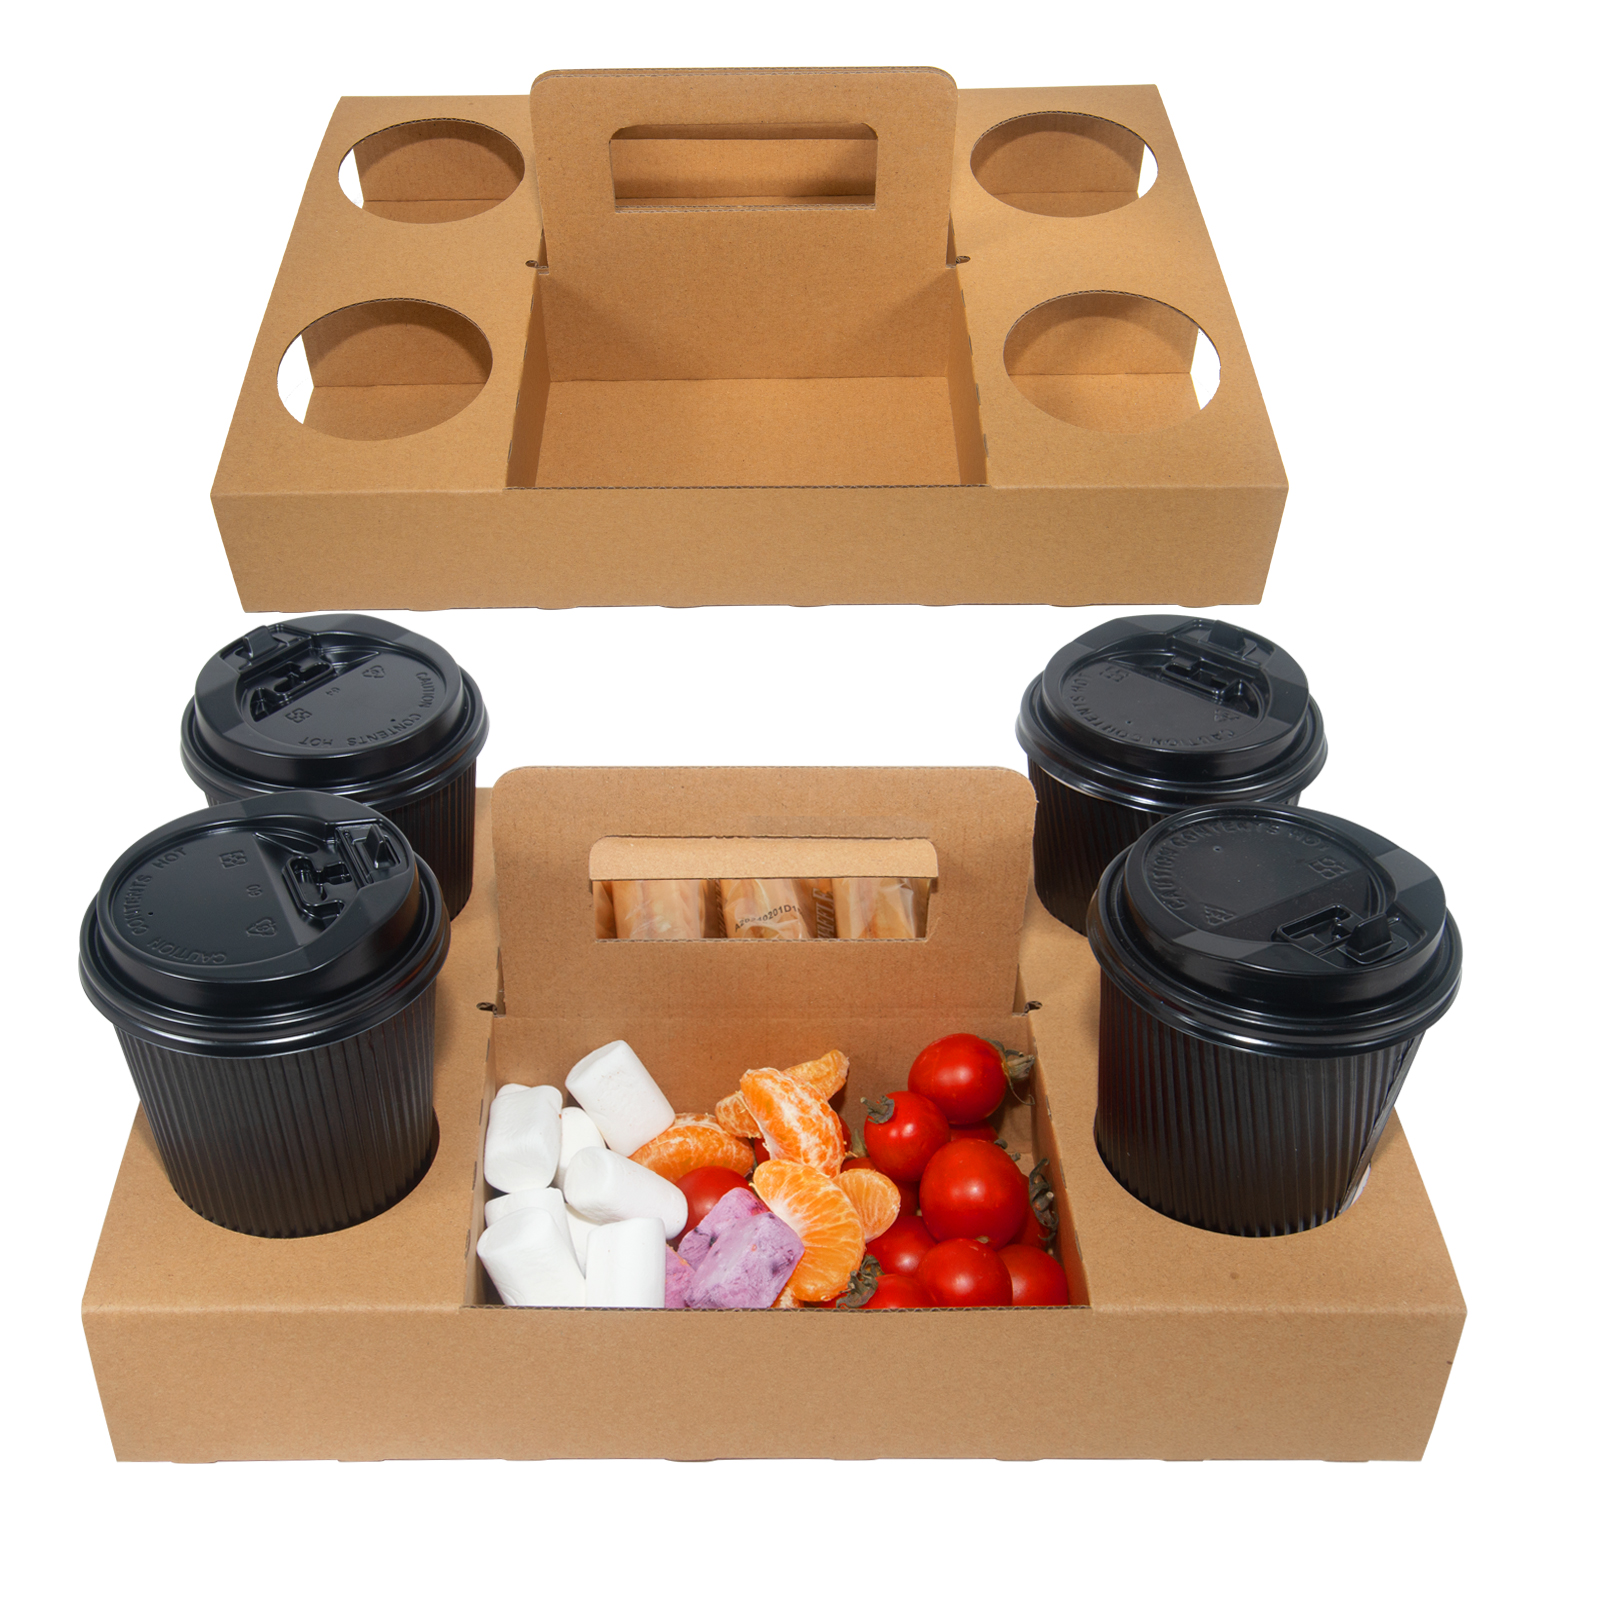 Bulk Eco-friendly Snack Platter Boxes Fruits Waffles Pancakes Grazing Box with Disposable Beverage Cup